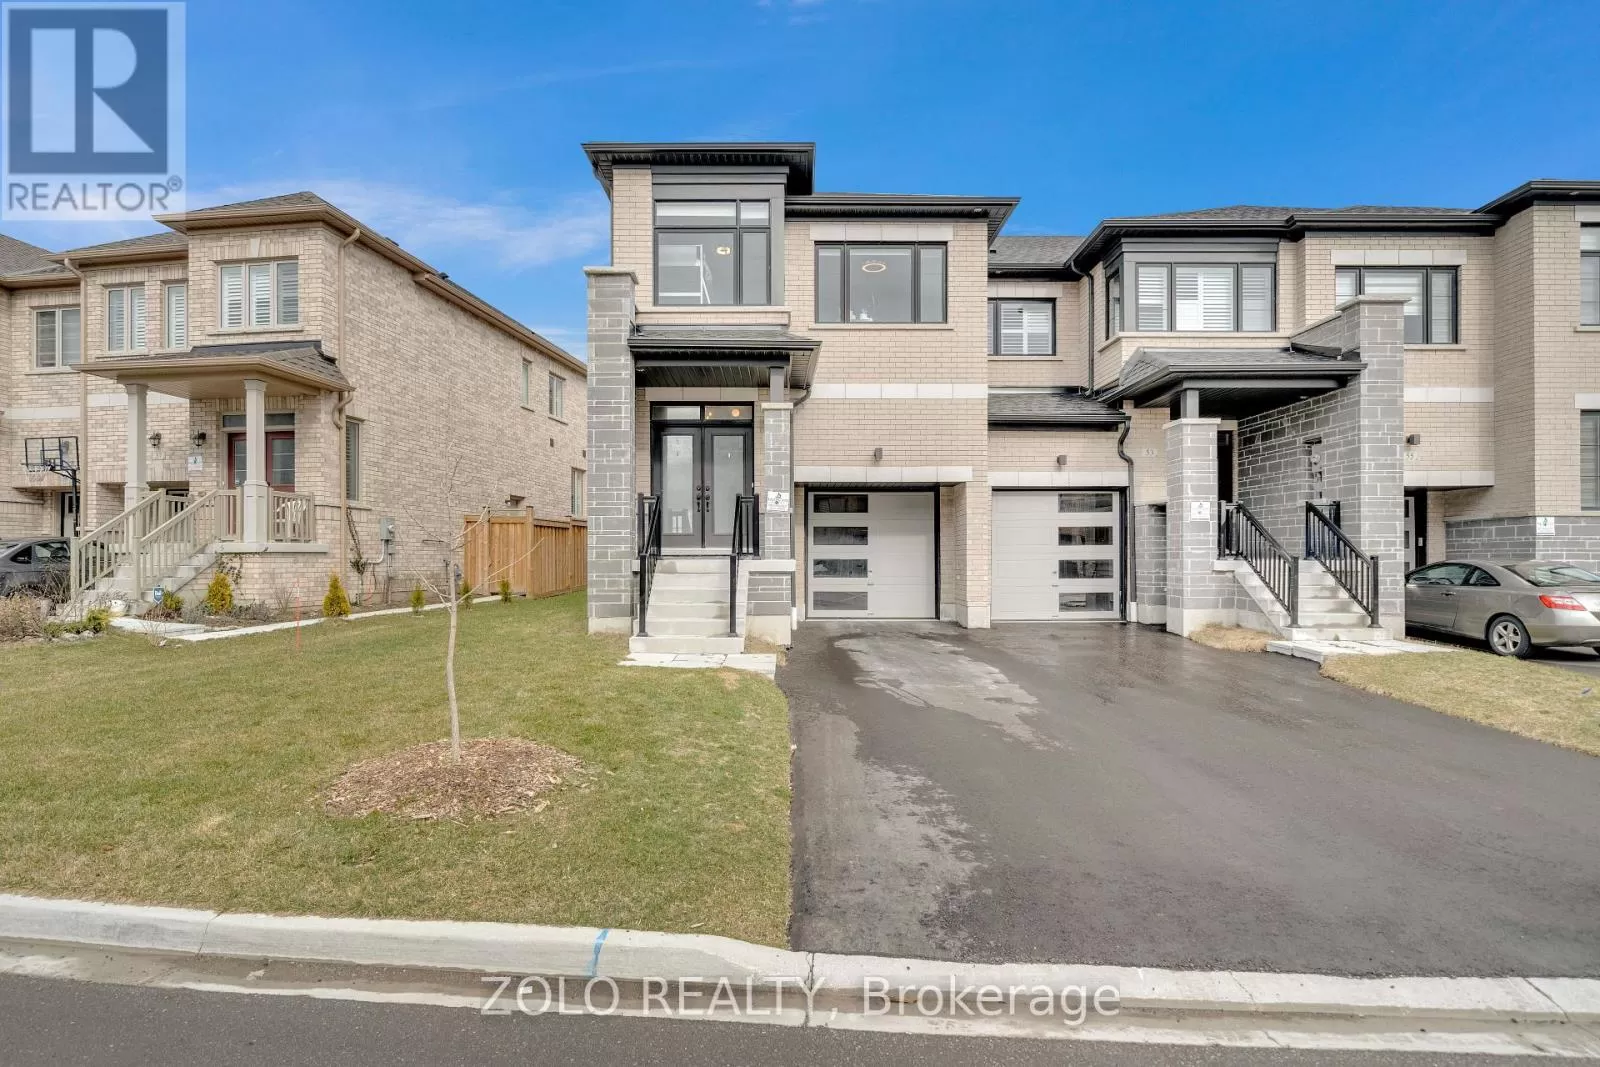 Row / Townhouse for rent: 51 Boundary Blvd, Whitchurch-Stouffville, Ontario L4A 4W2